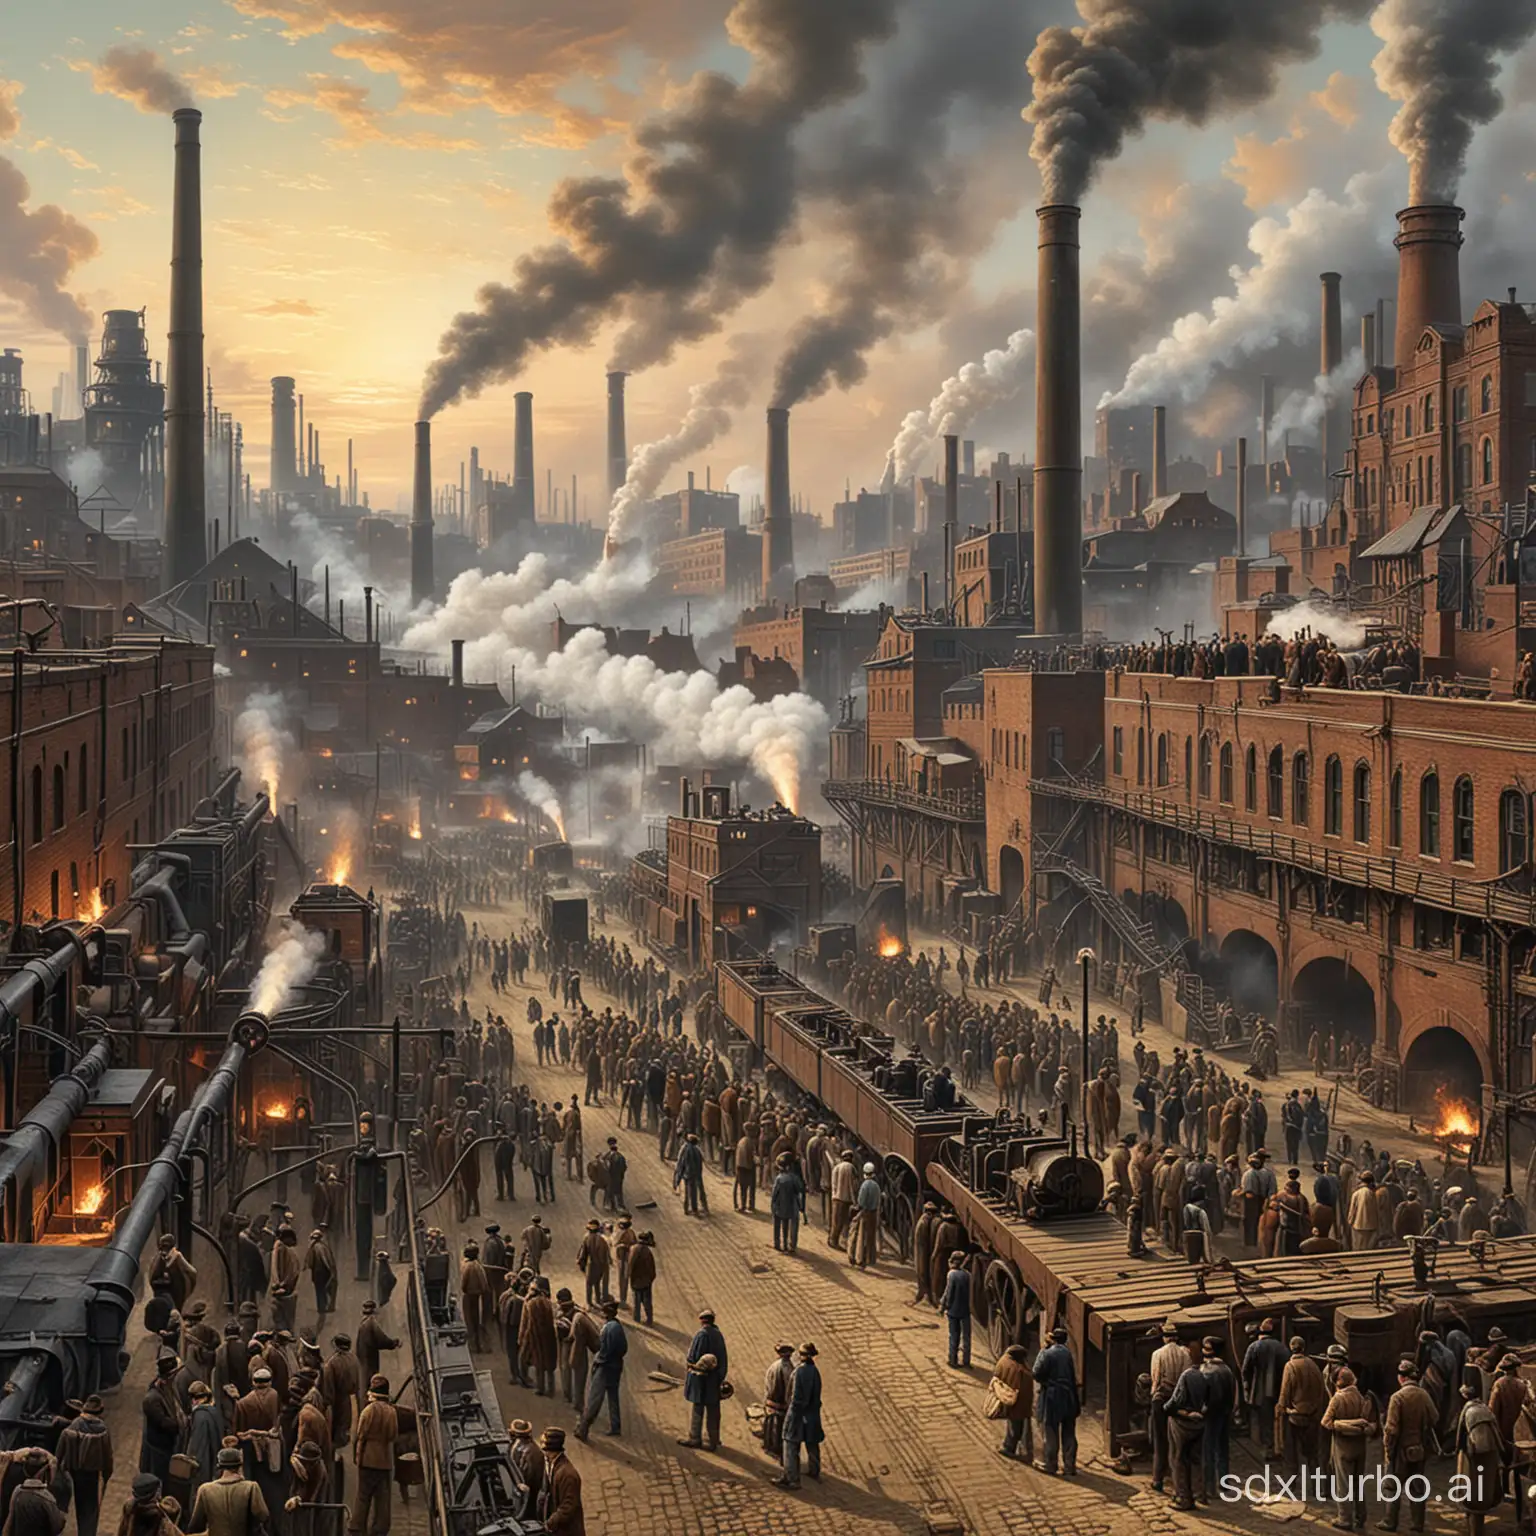 Industrial-Revolution-Machinery-in-a-Factory-Setting